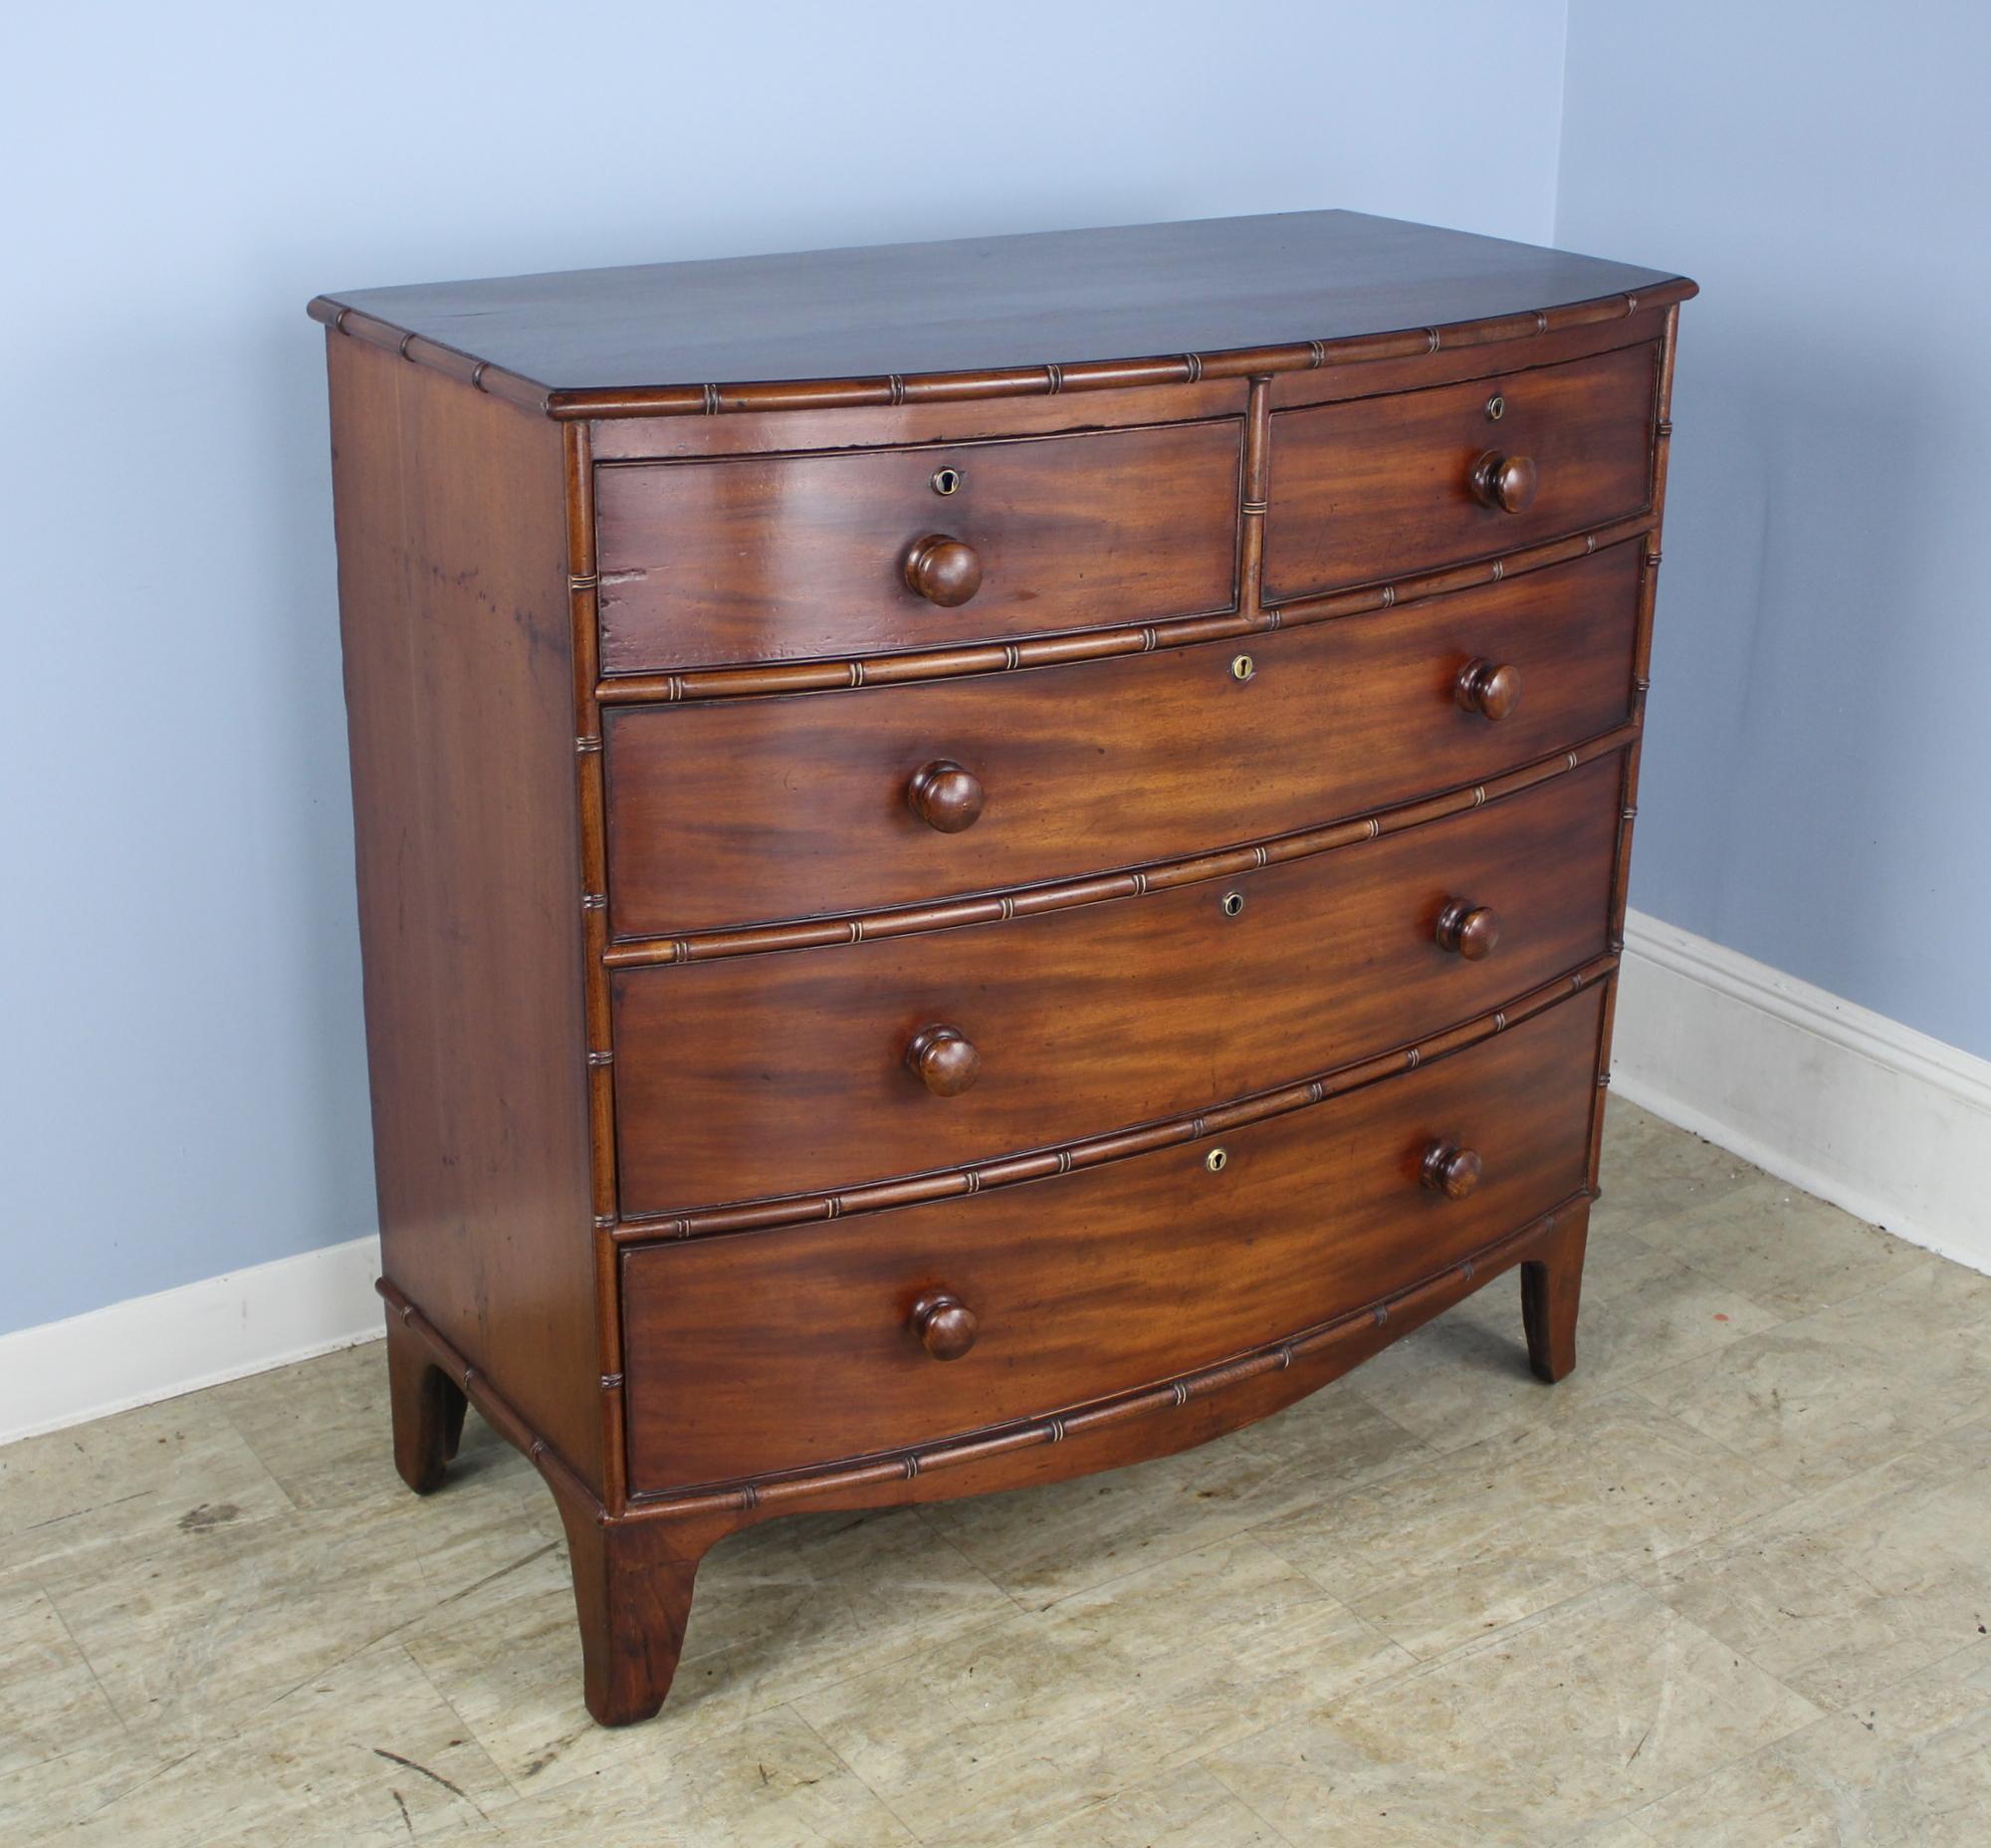 A stunning early English mahogany bowfront chest of drawers in very good condition with very good faux bamboo detail. Original bracket feet and nice grain give this piece eye catching appeal. Drawers open and close snugly and easily.